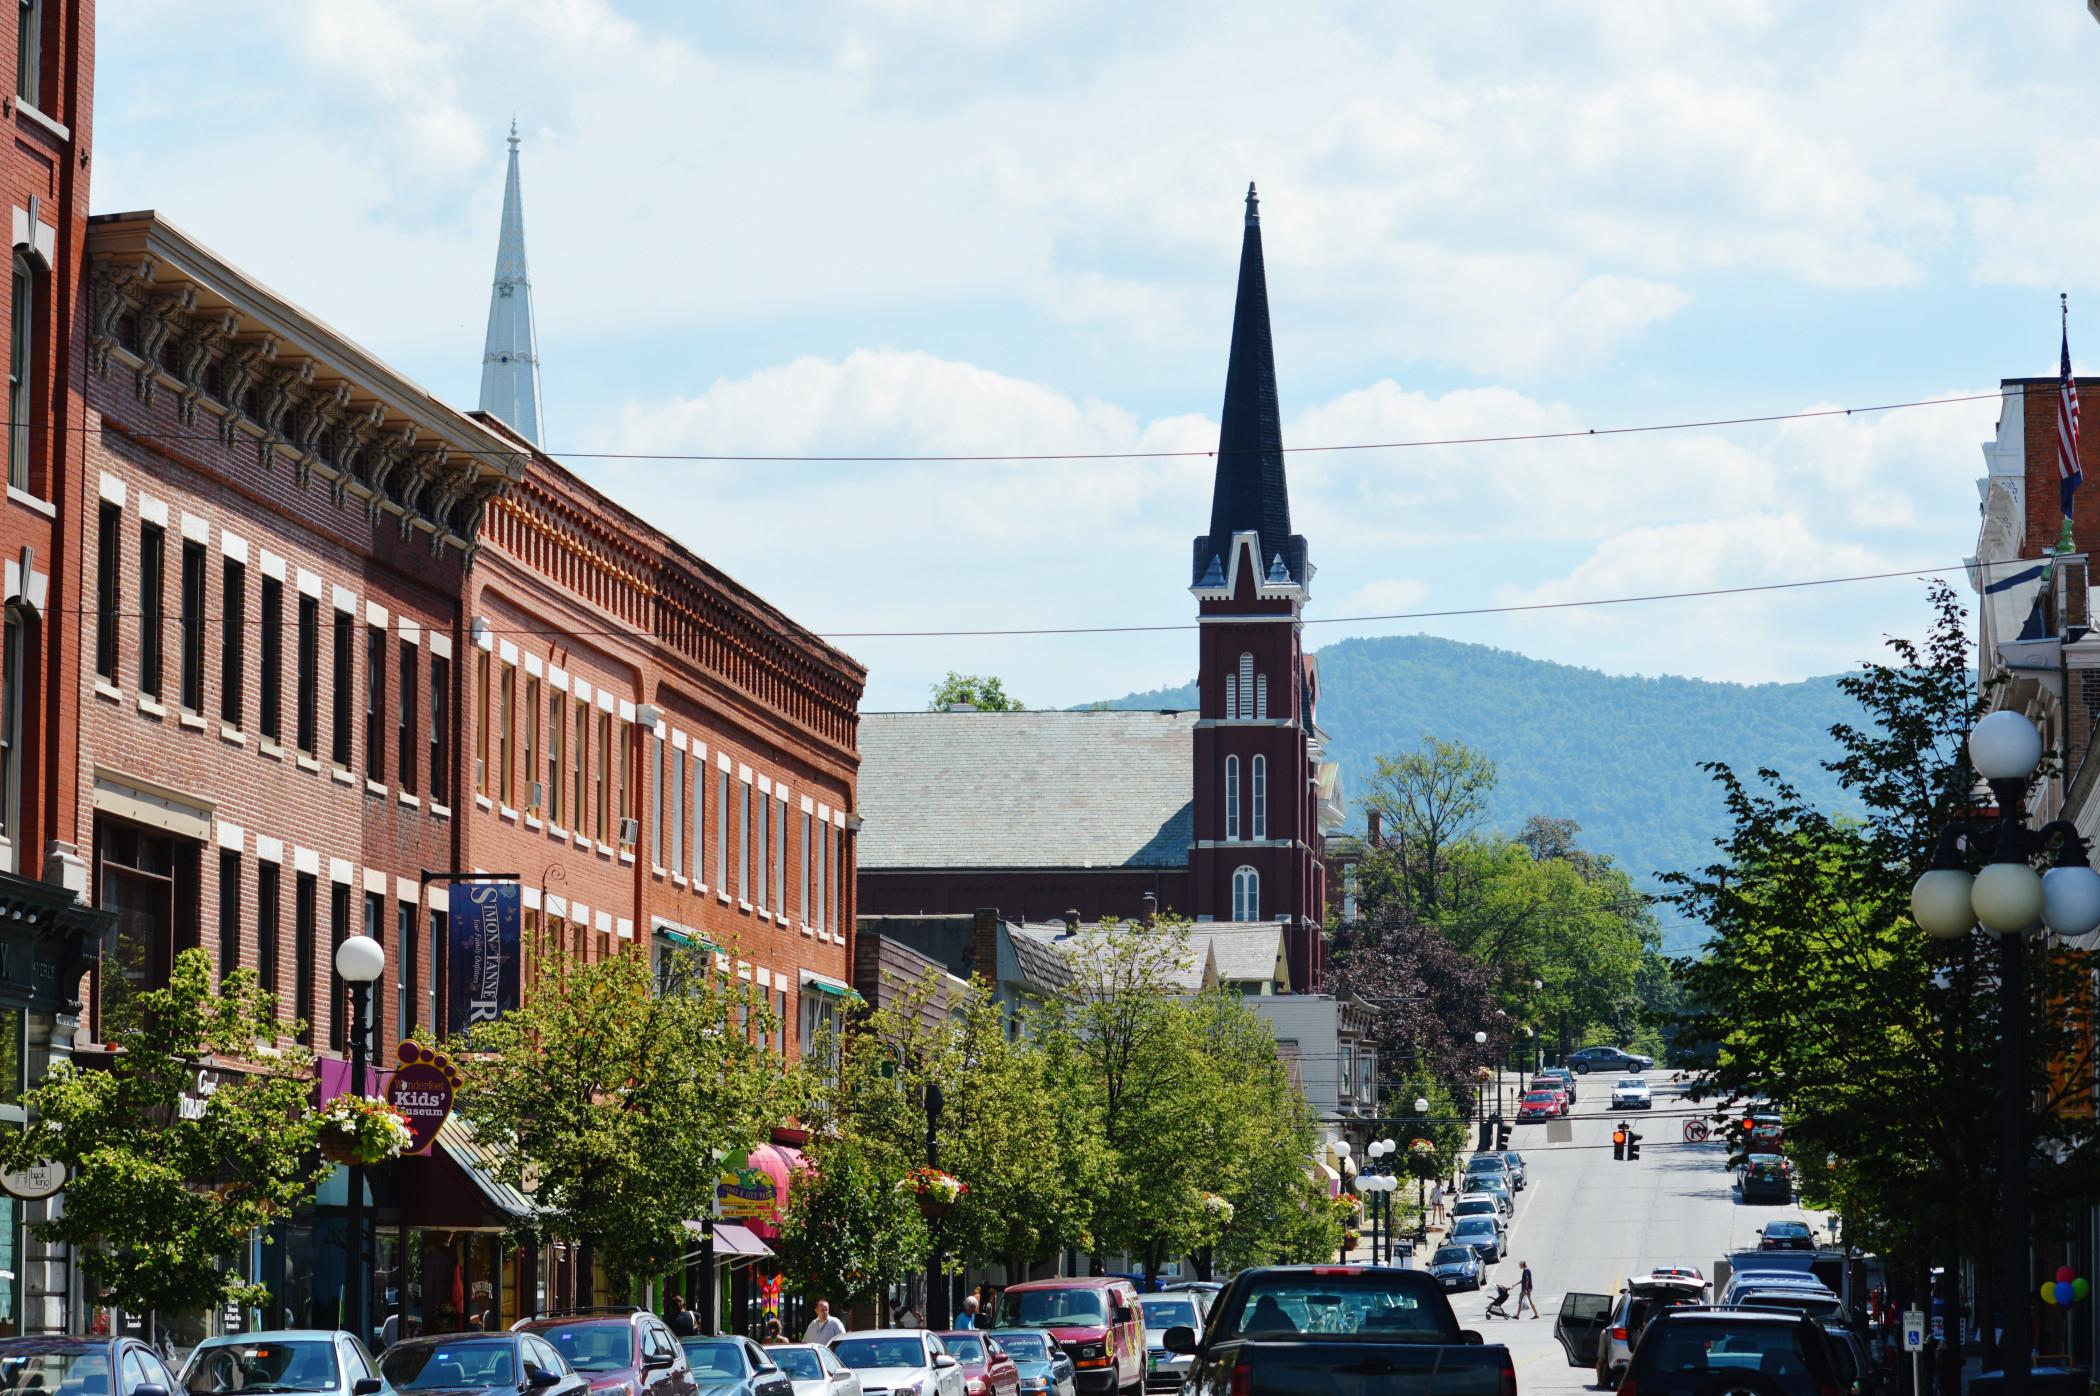 Vermont residents can rest easy knowing that they spend less on commuting than other states.